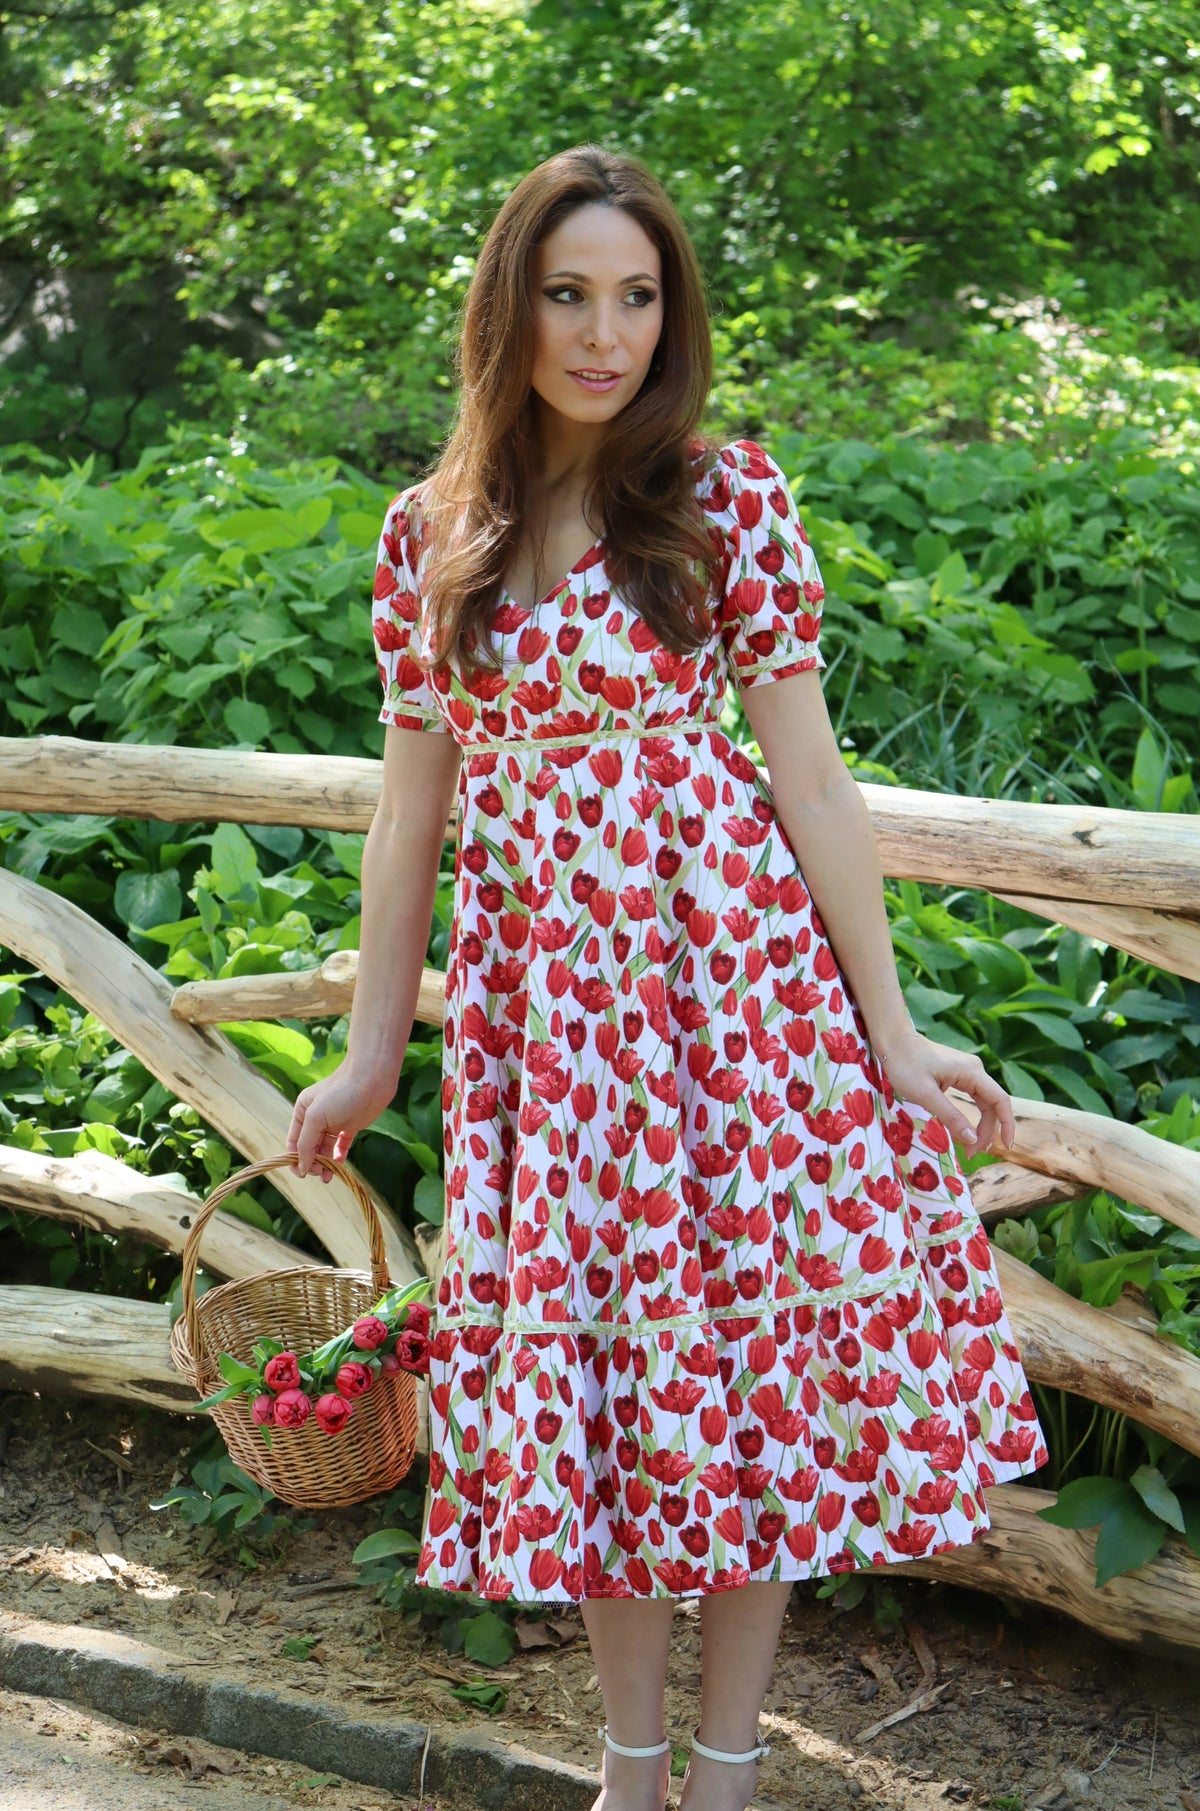 Model wearing midi length dress with a tulip print on white in front of a wood fence.